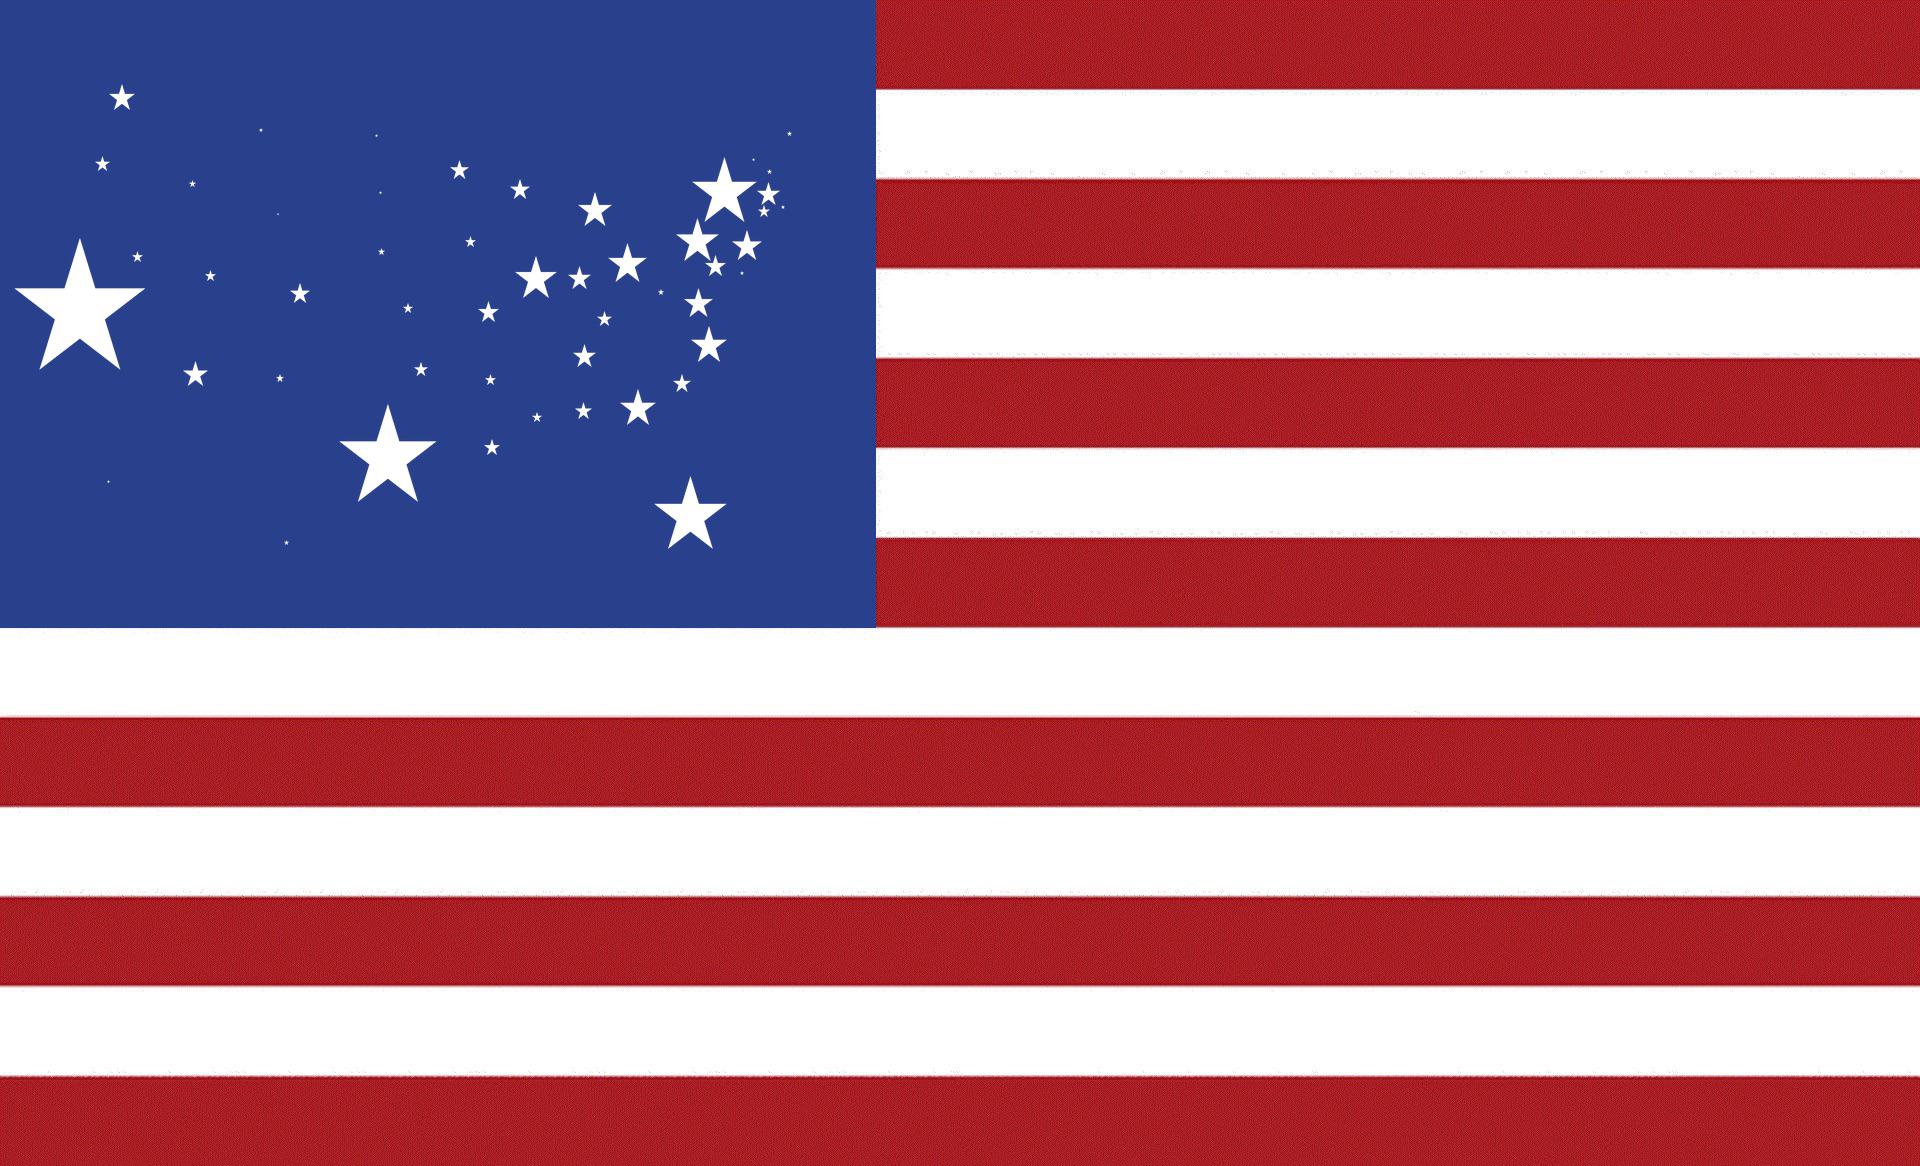 Flag of the United States with star sizes relative to population (OmarZlada 2021)